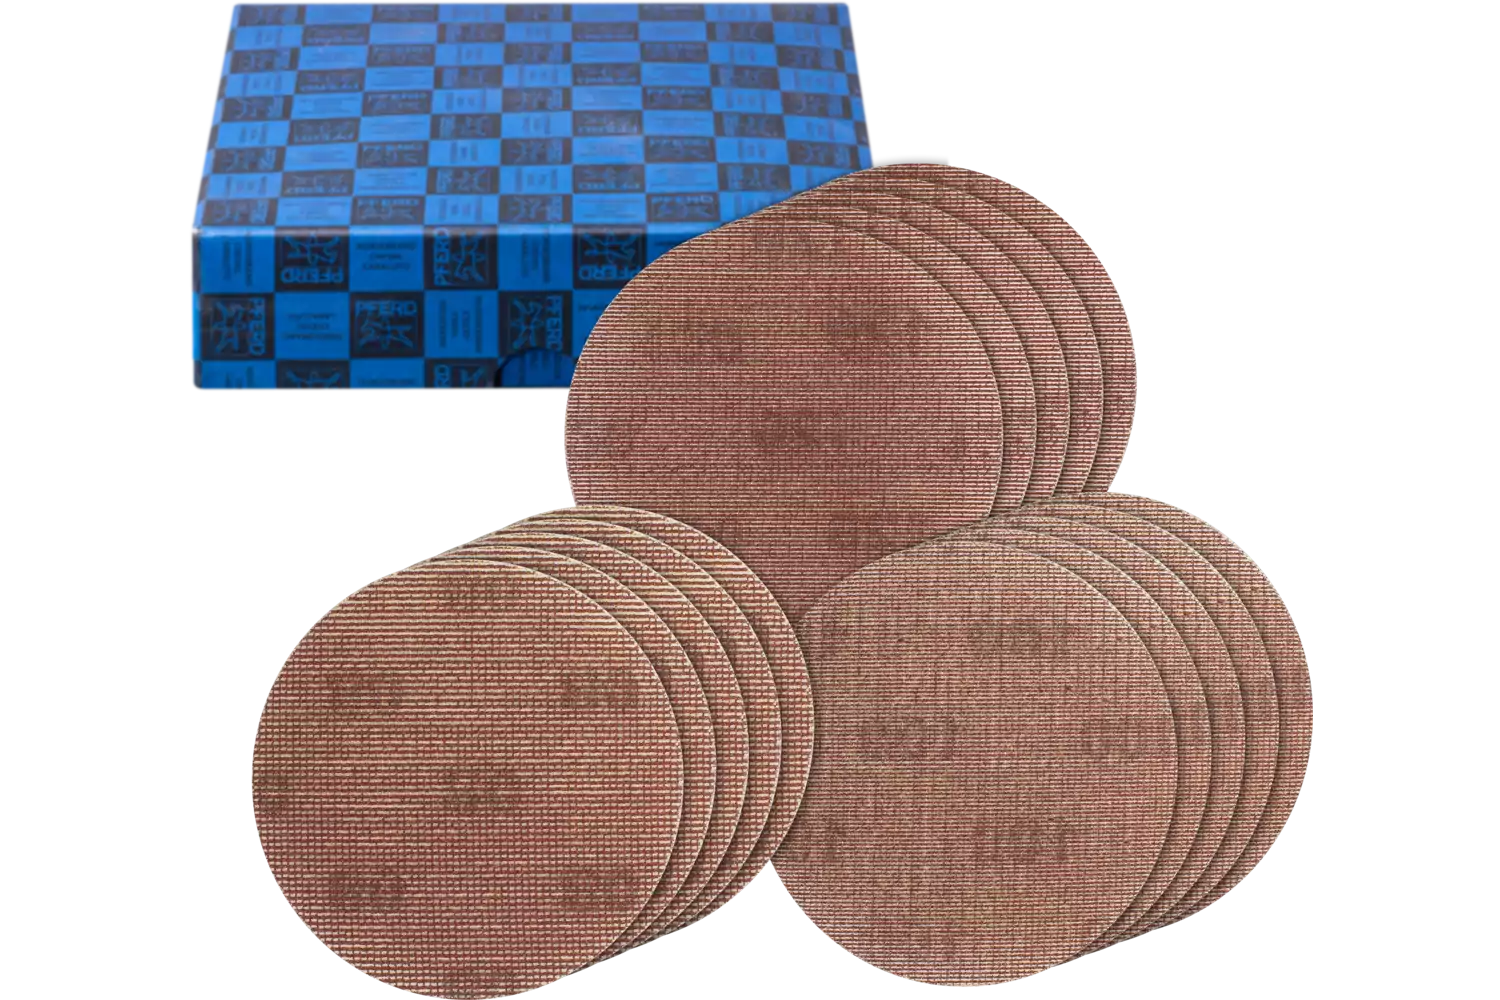 netting Velcro-backed abrasive disc set coarse 15-piece dia. 150 A80,100,120 low dust with eccentric orbital sander 1